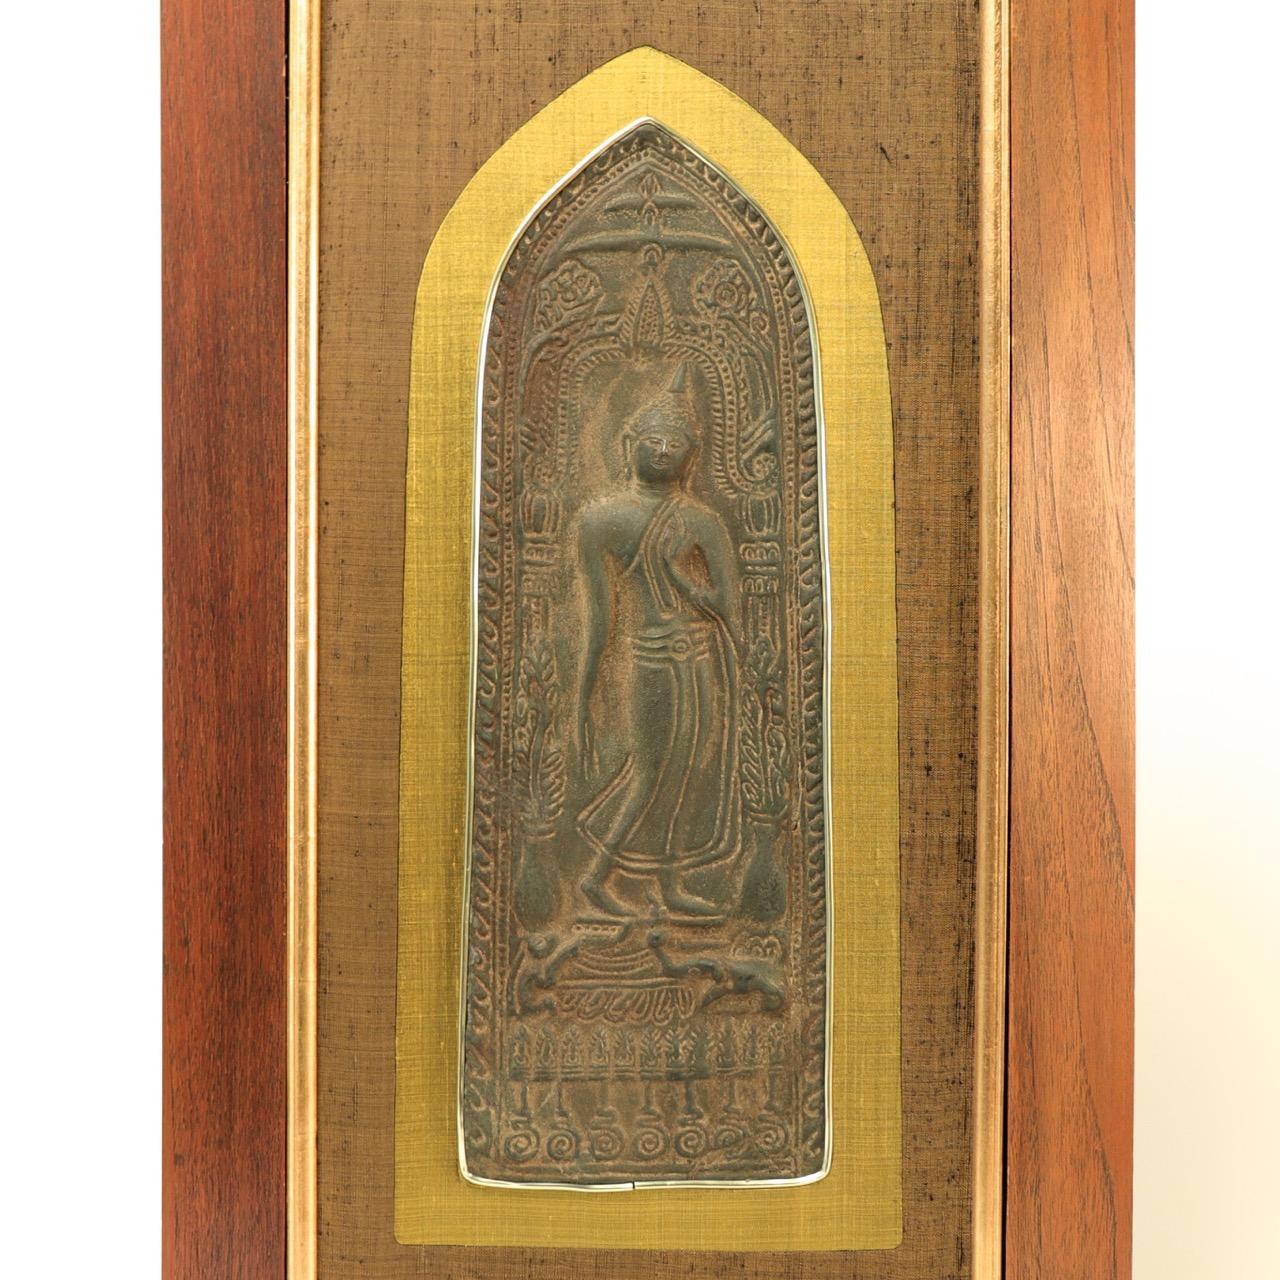 Thai Buddhist Votive Plaque, Sukhothai style, cast  in relief from a metal alloy of tin and lead with an iron like surface of a deep brown colour, depicting a relief image of a walking Buddha. His left foot planted firmly on the ground while his